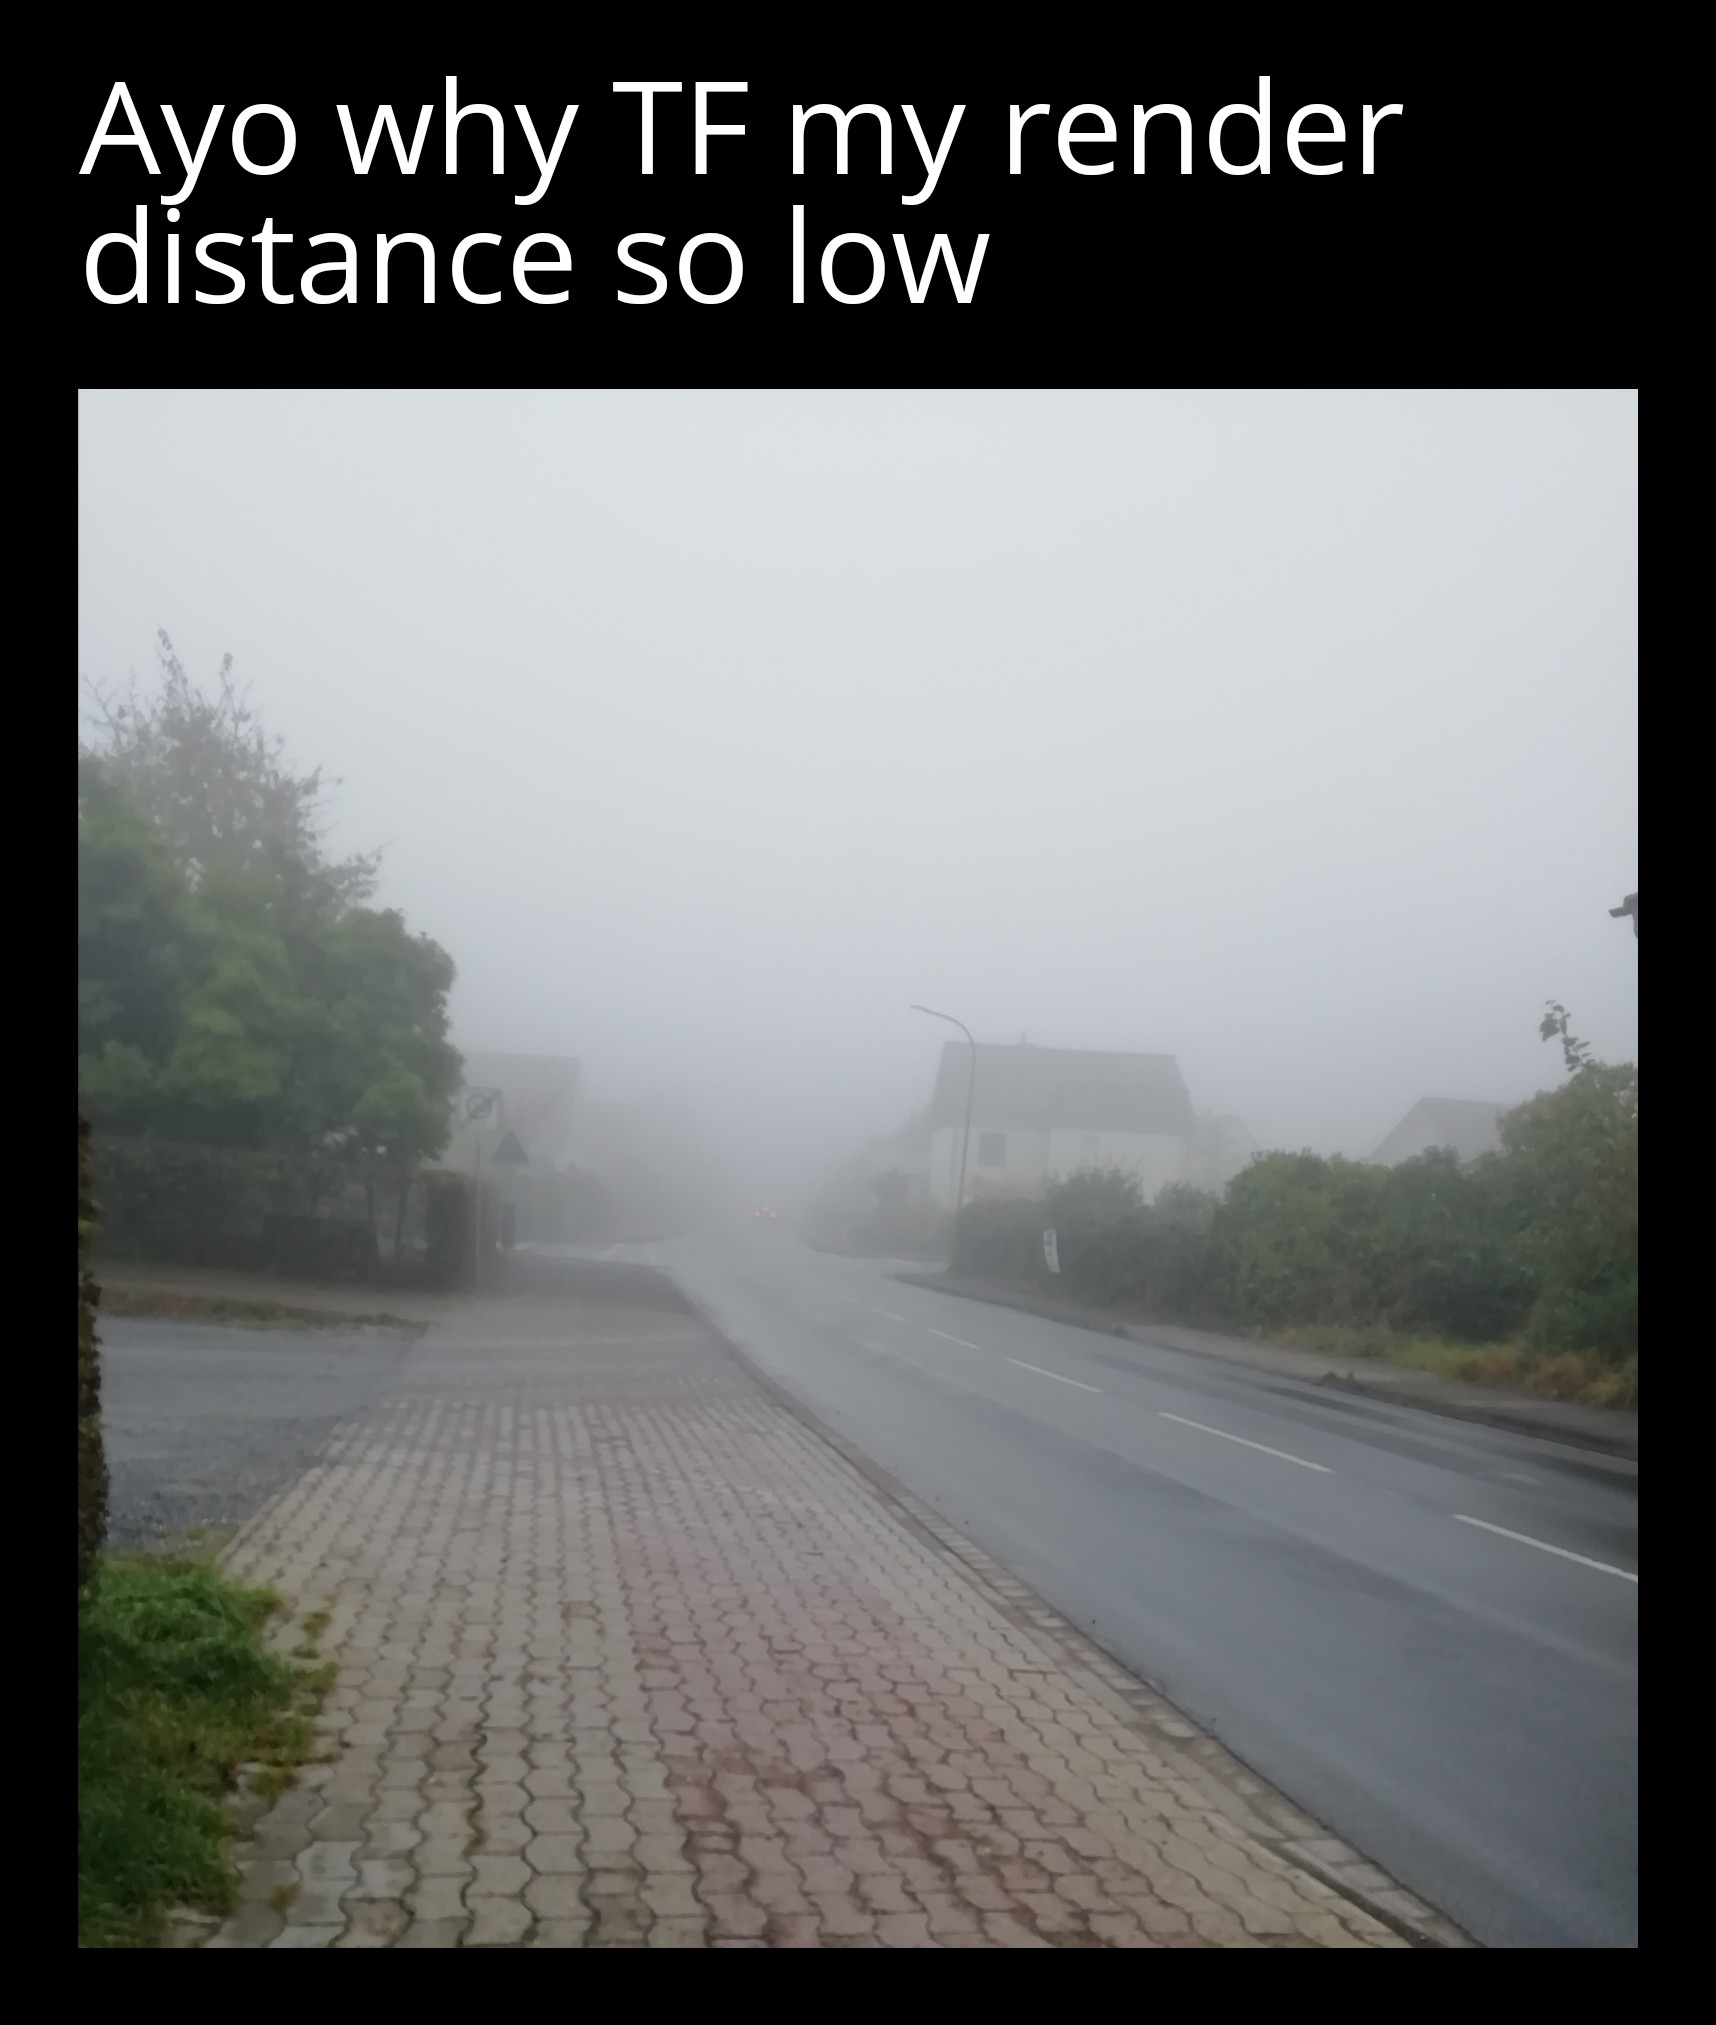 fog - Ayo why Tf my render distance so low